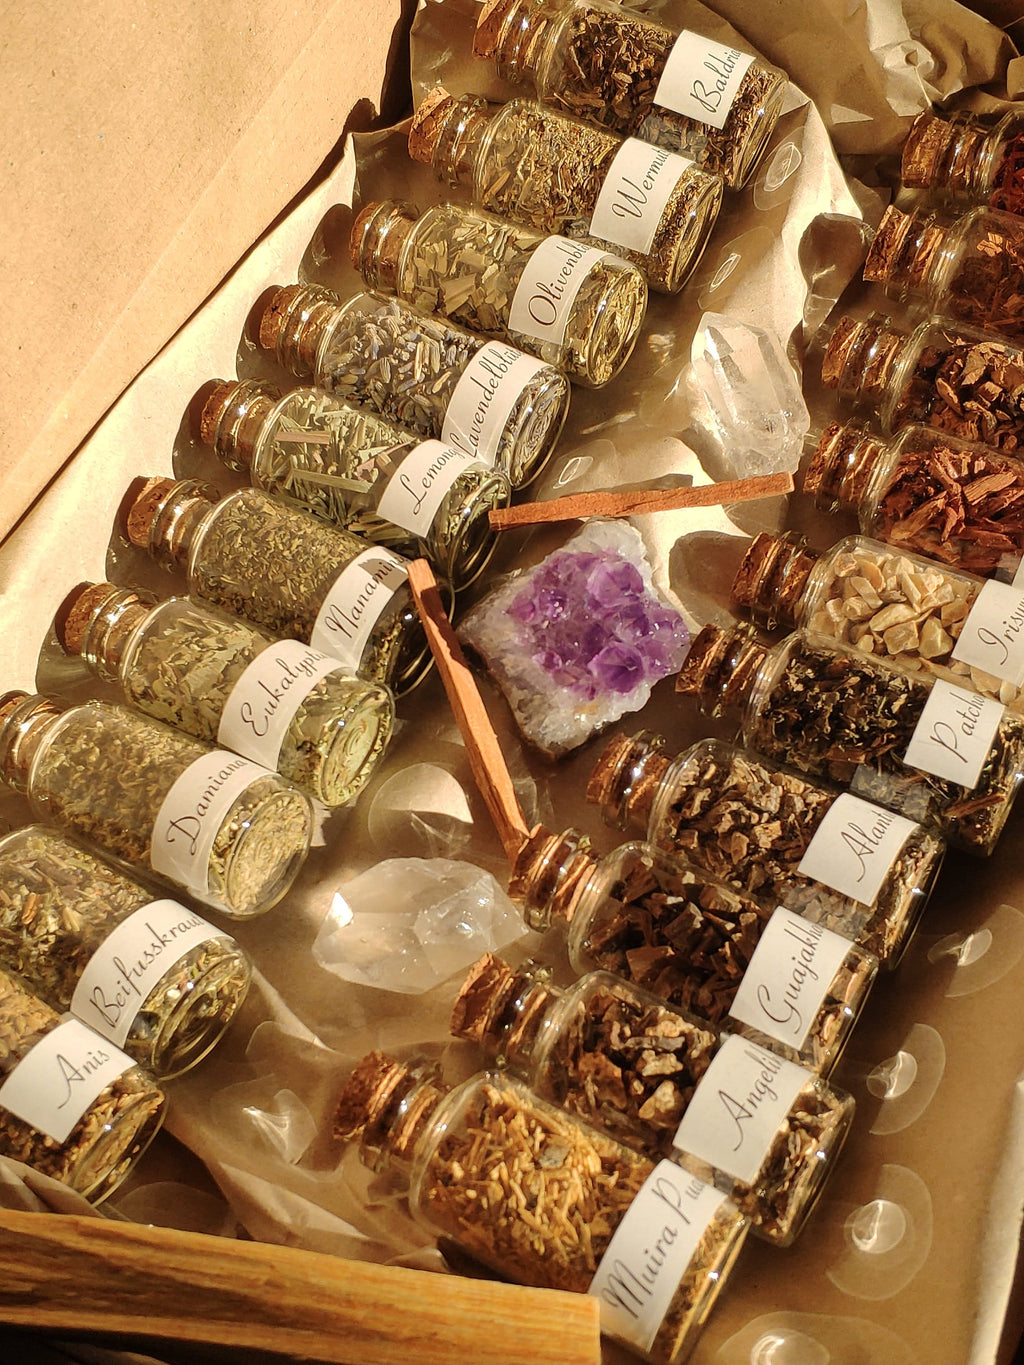 Incense from Around the World 40x Herbs Woods Resins Shamans Indian Witches Gift Set Sweet Smudge Incense Tranquility Protection Ritual Meditation